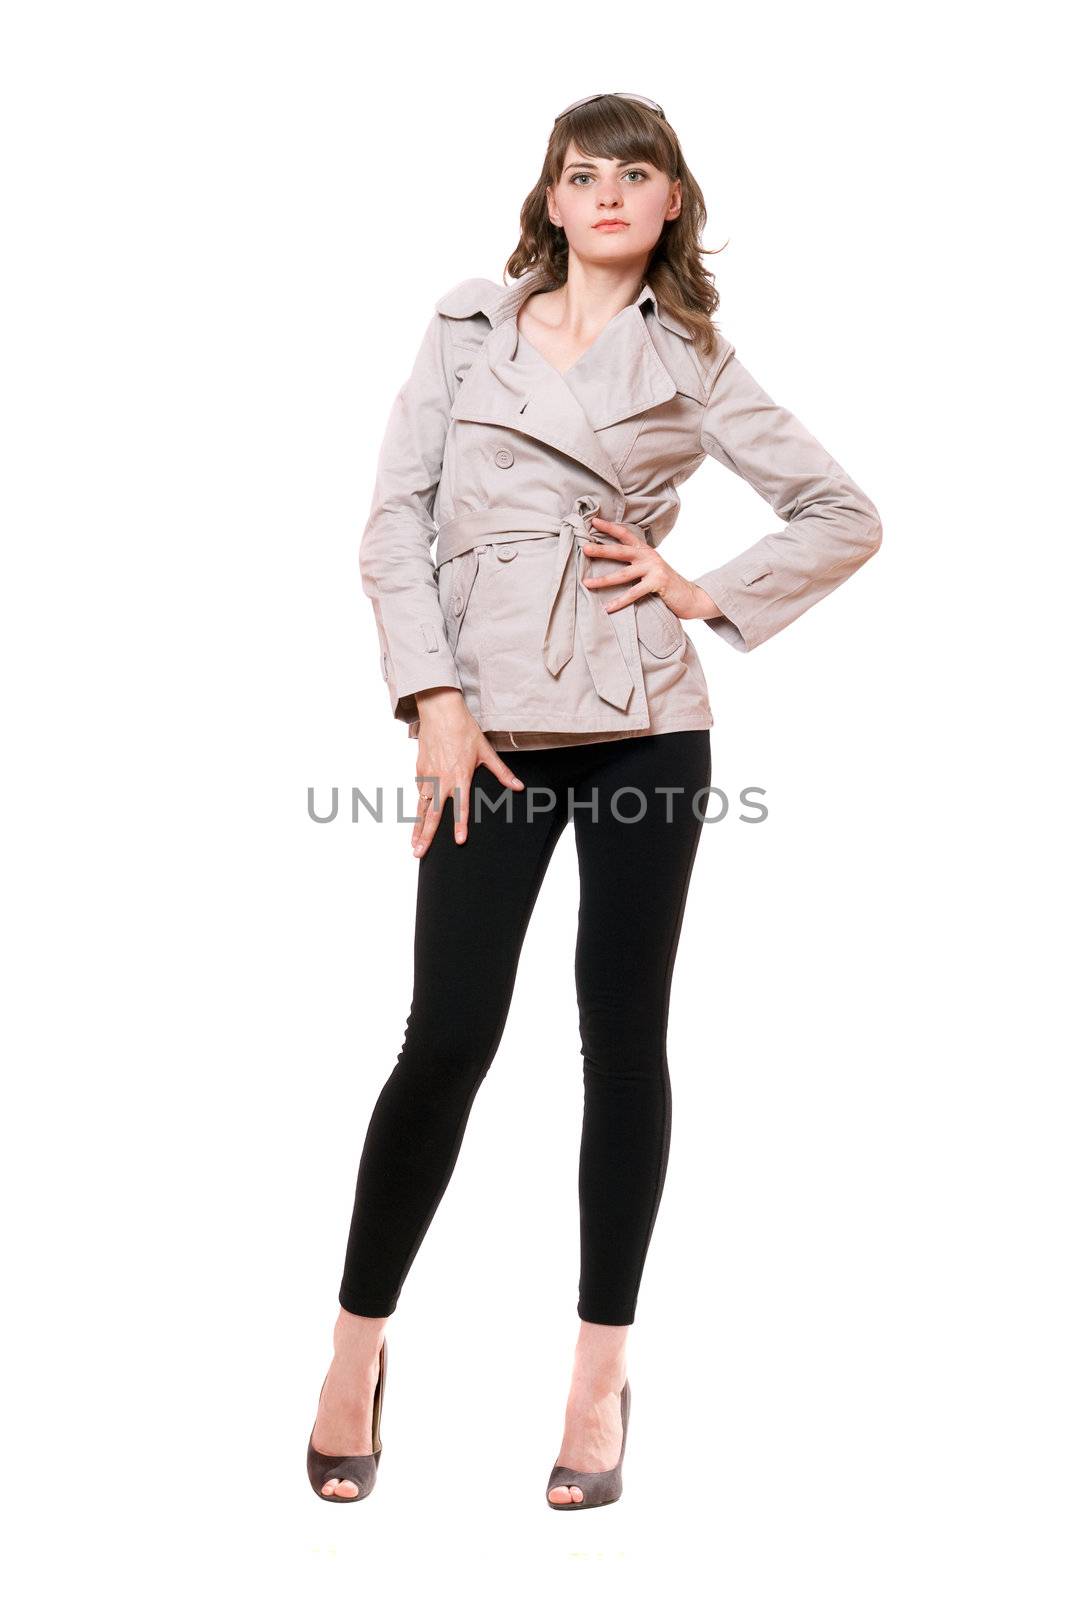 Pretty young woman wearing a coat and black leggings. Isolated